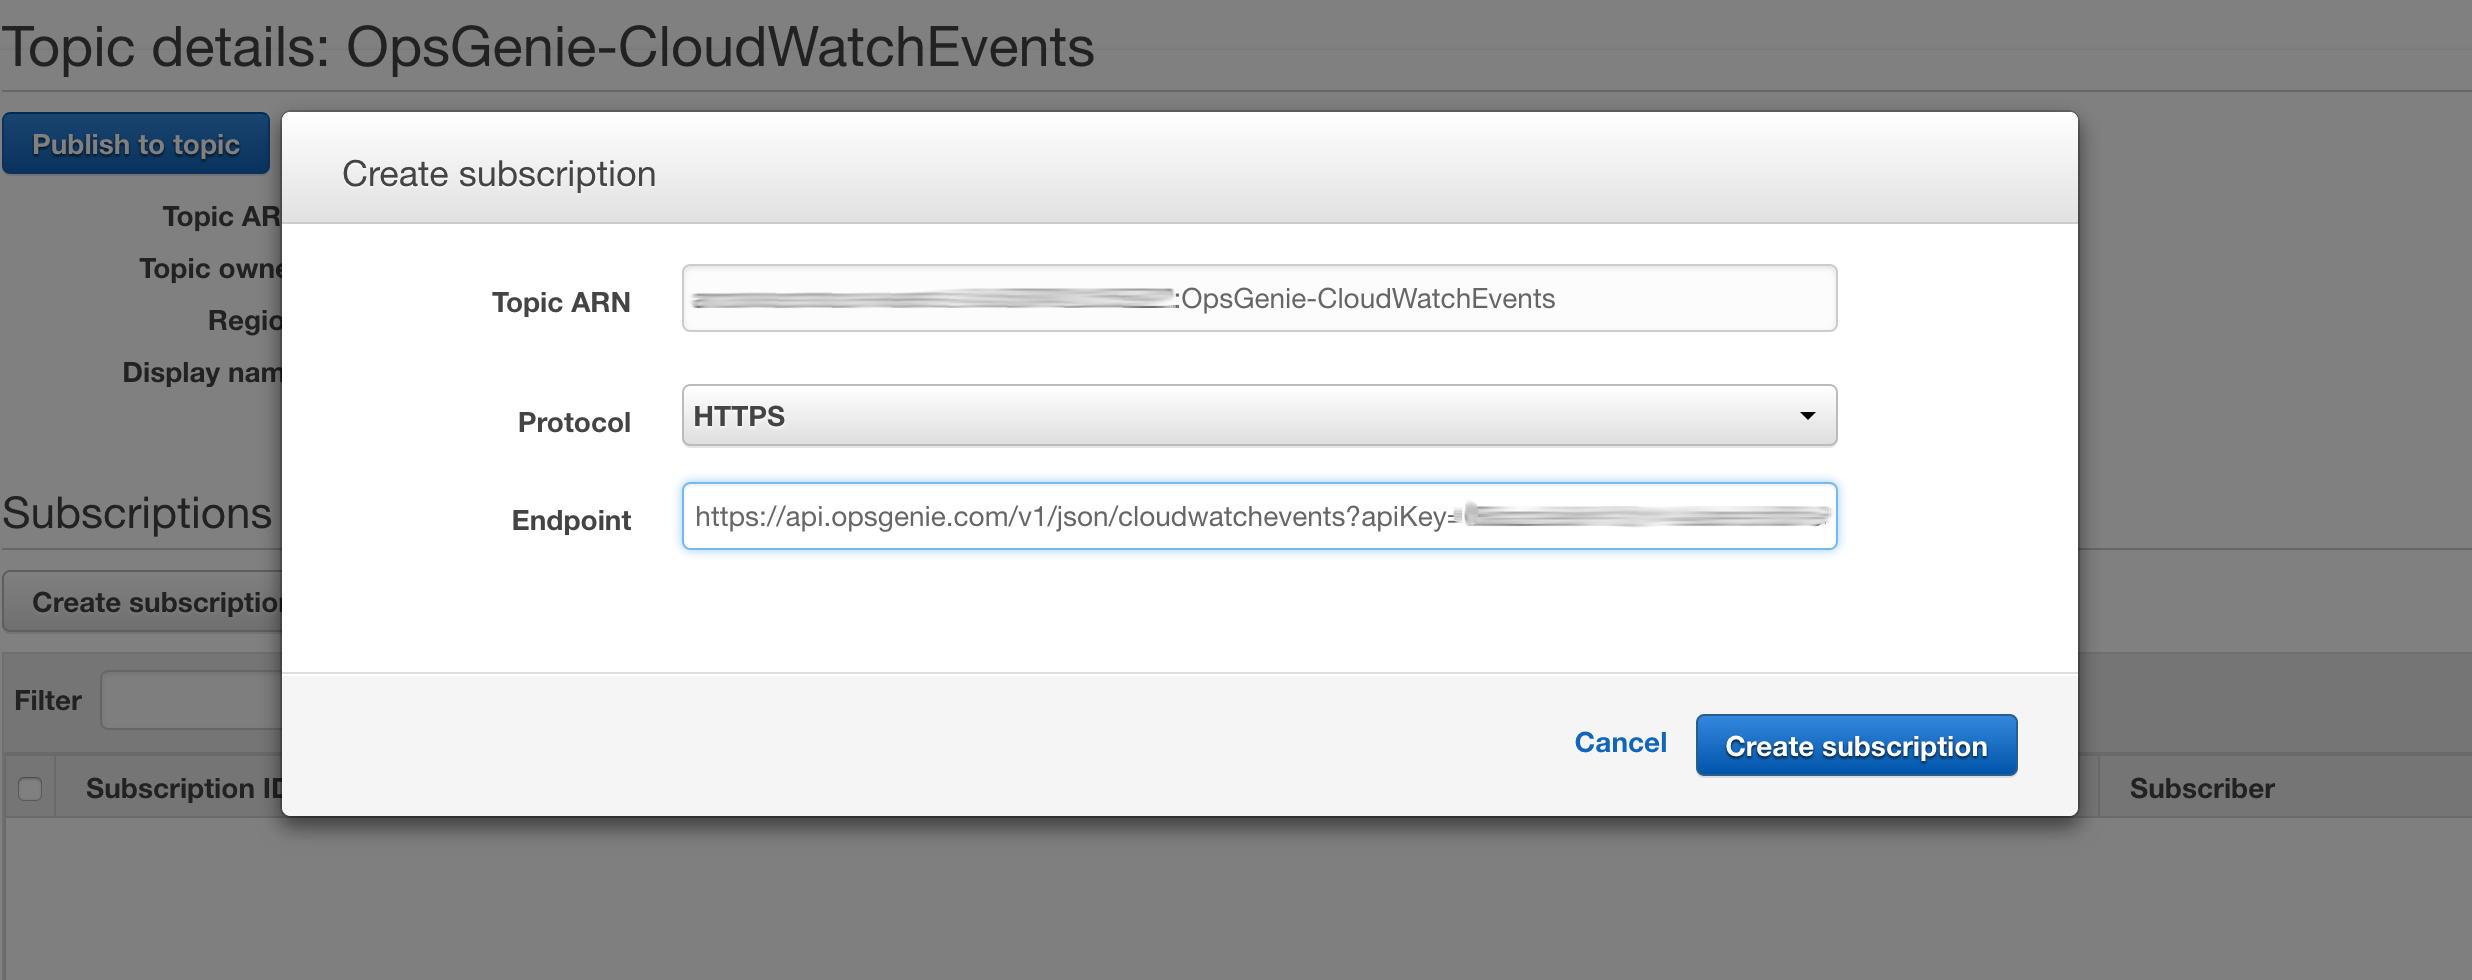 CloudWatch Events create subscription